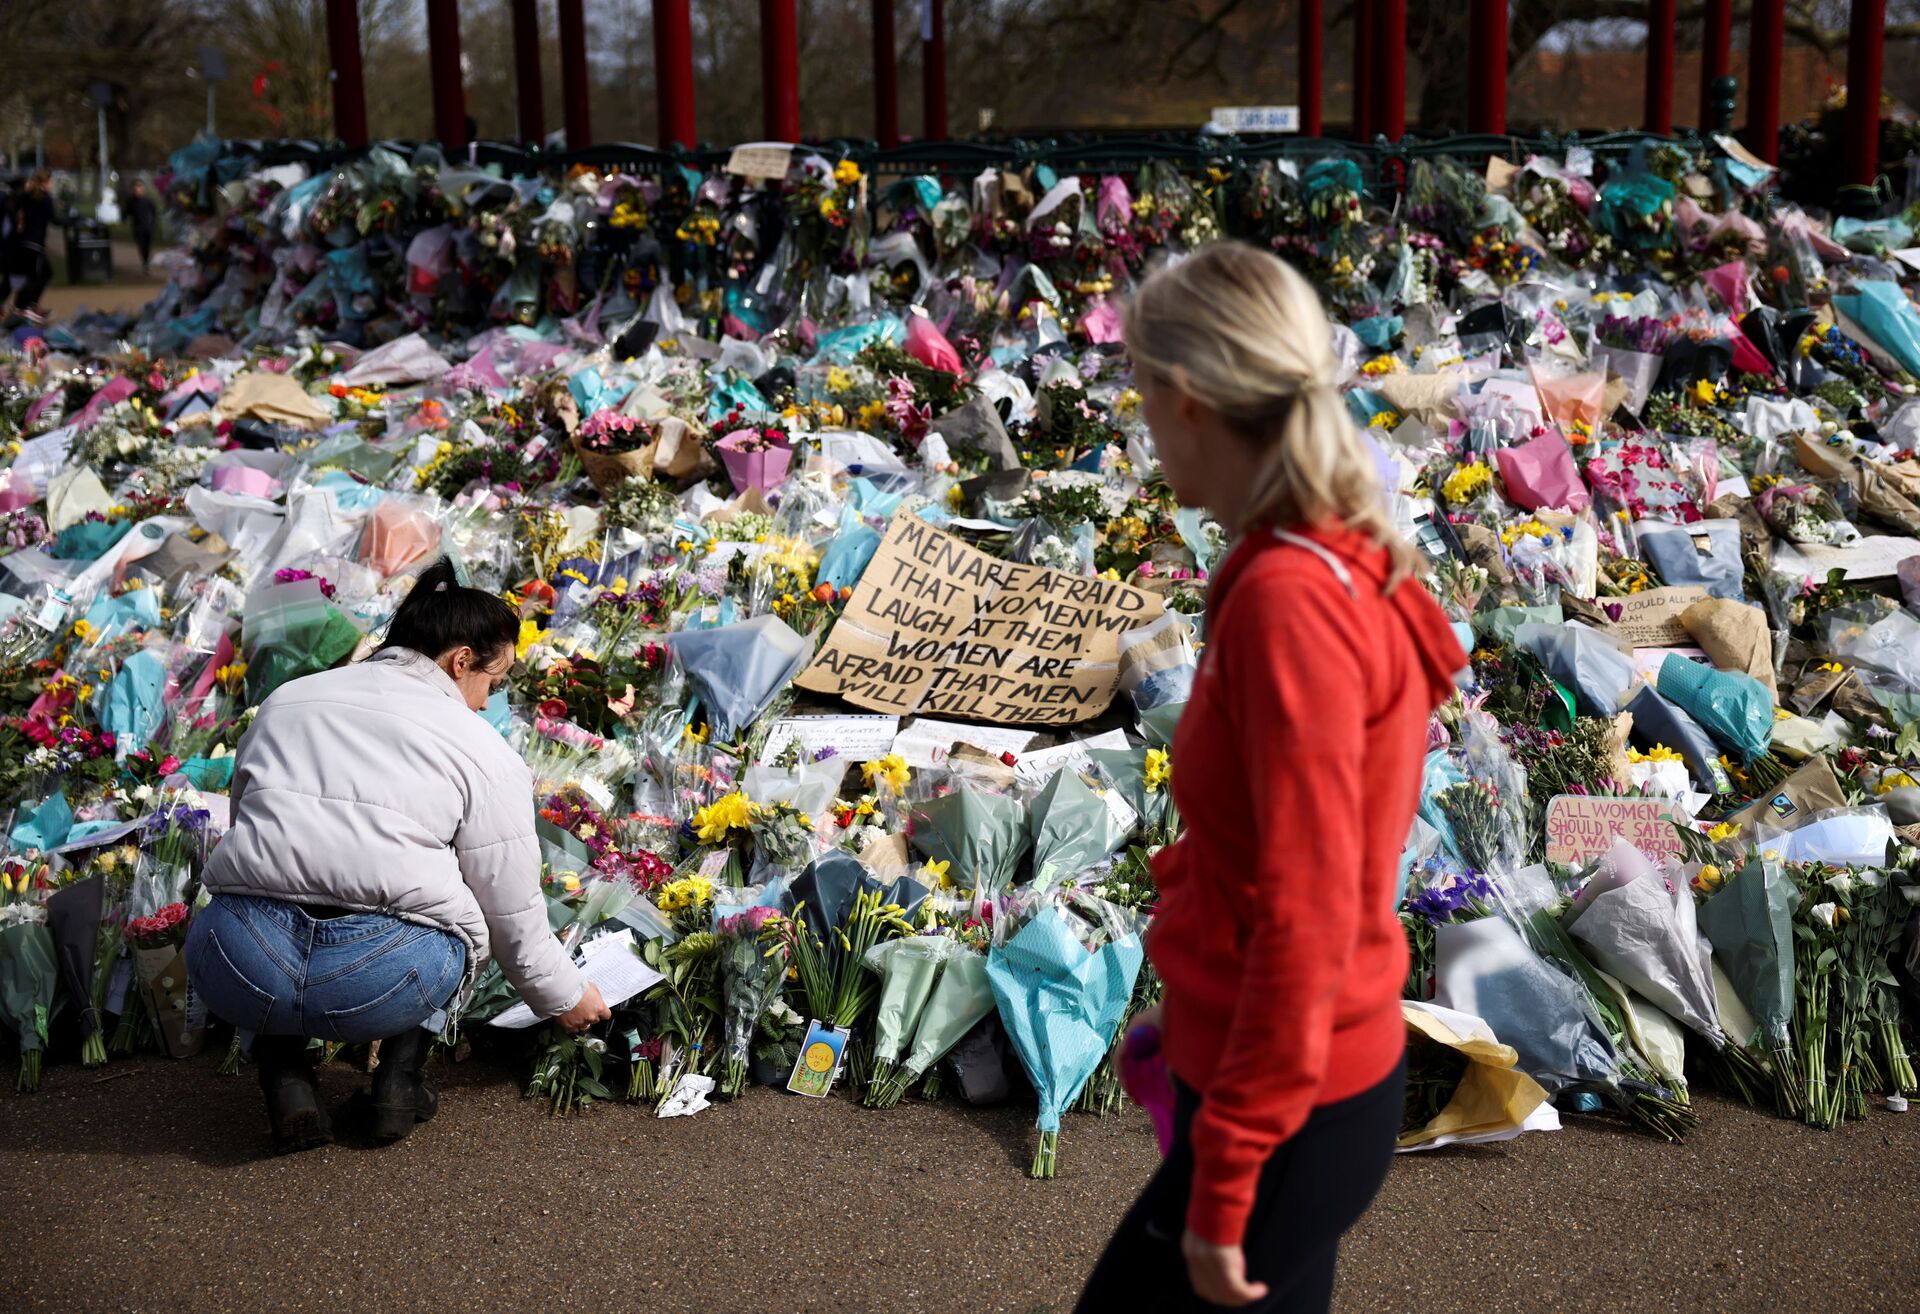 People observe a memorial site at the Clapham Common Bandstand, following the kidnapping and murder of Sarah Everard, in London, Britain, March 21, 2021 - Sputnik International, 1920, 07.09.2021